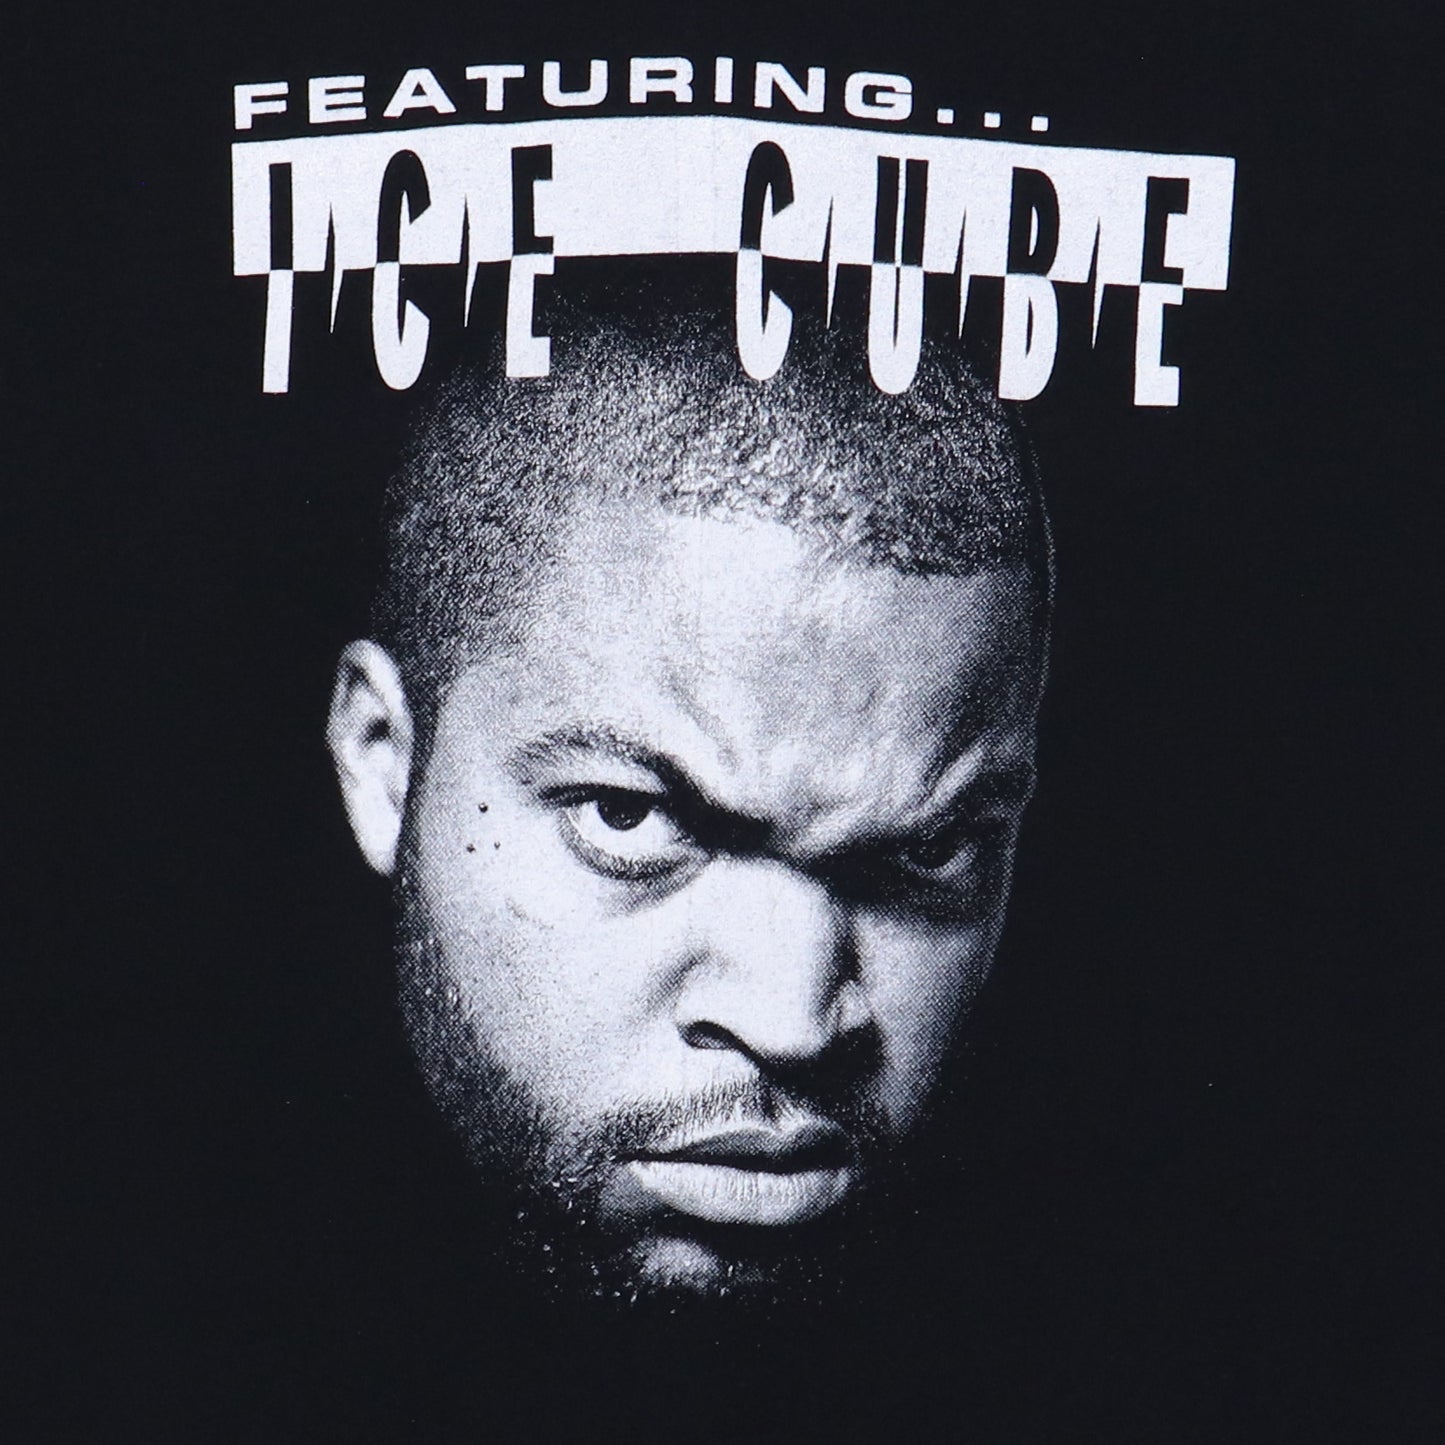 Featuring Ice Cube